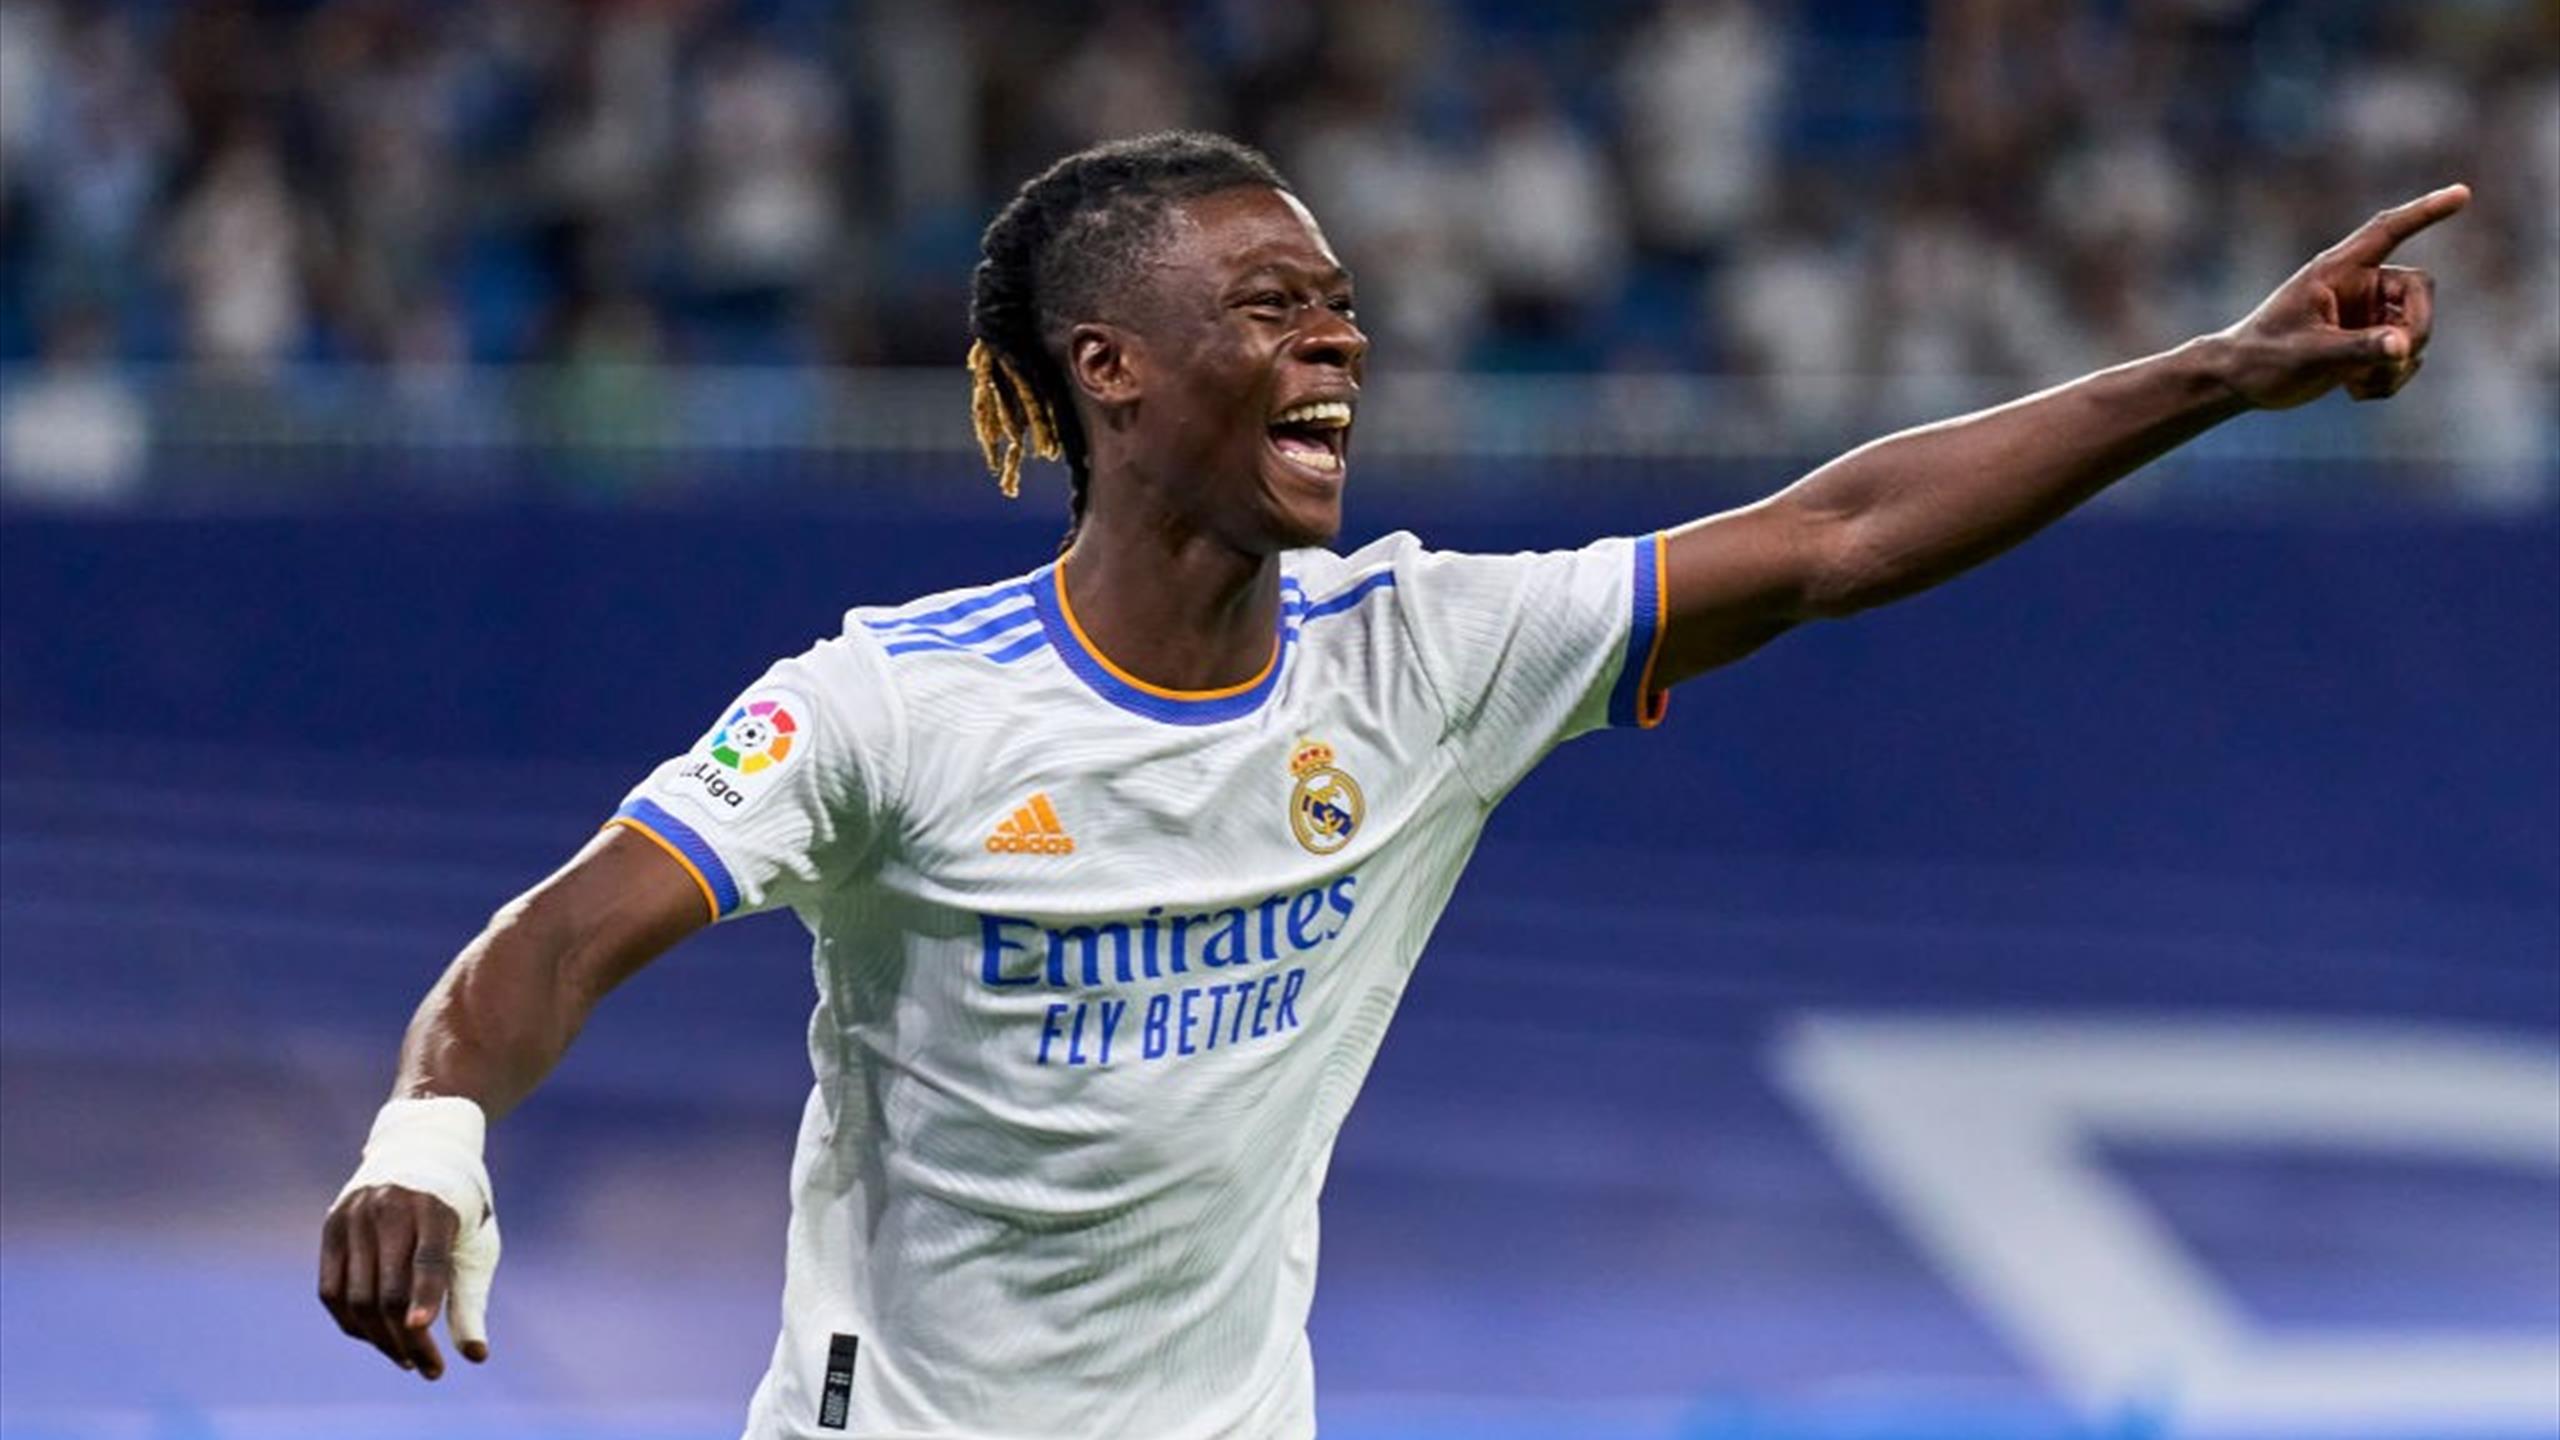 Exclusive: 'A real thirst to learn' Camavinga's former youth coach on rapid start at Real Madrid